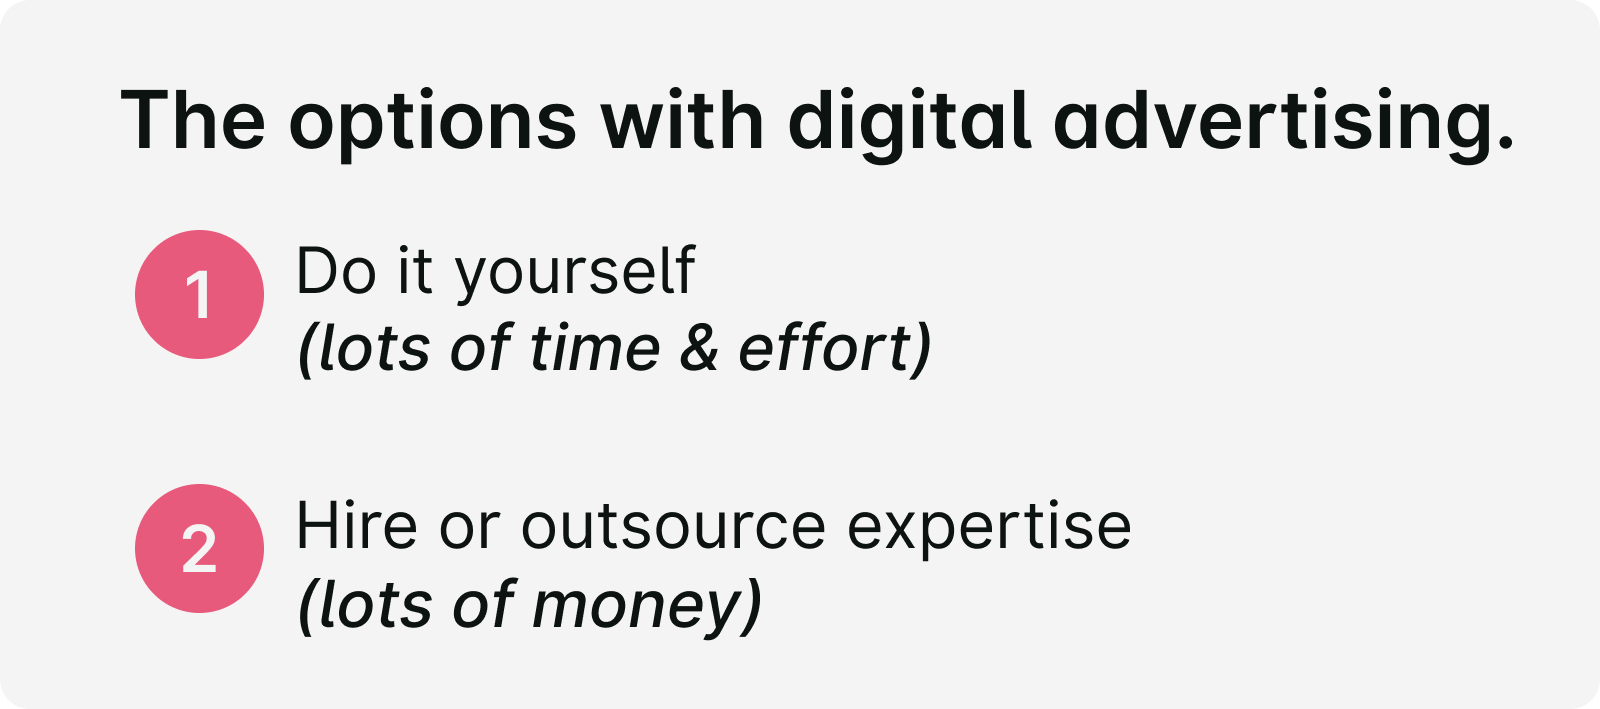 The options with digital advertising